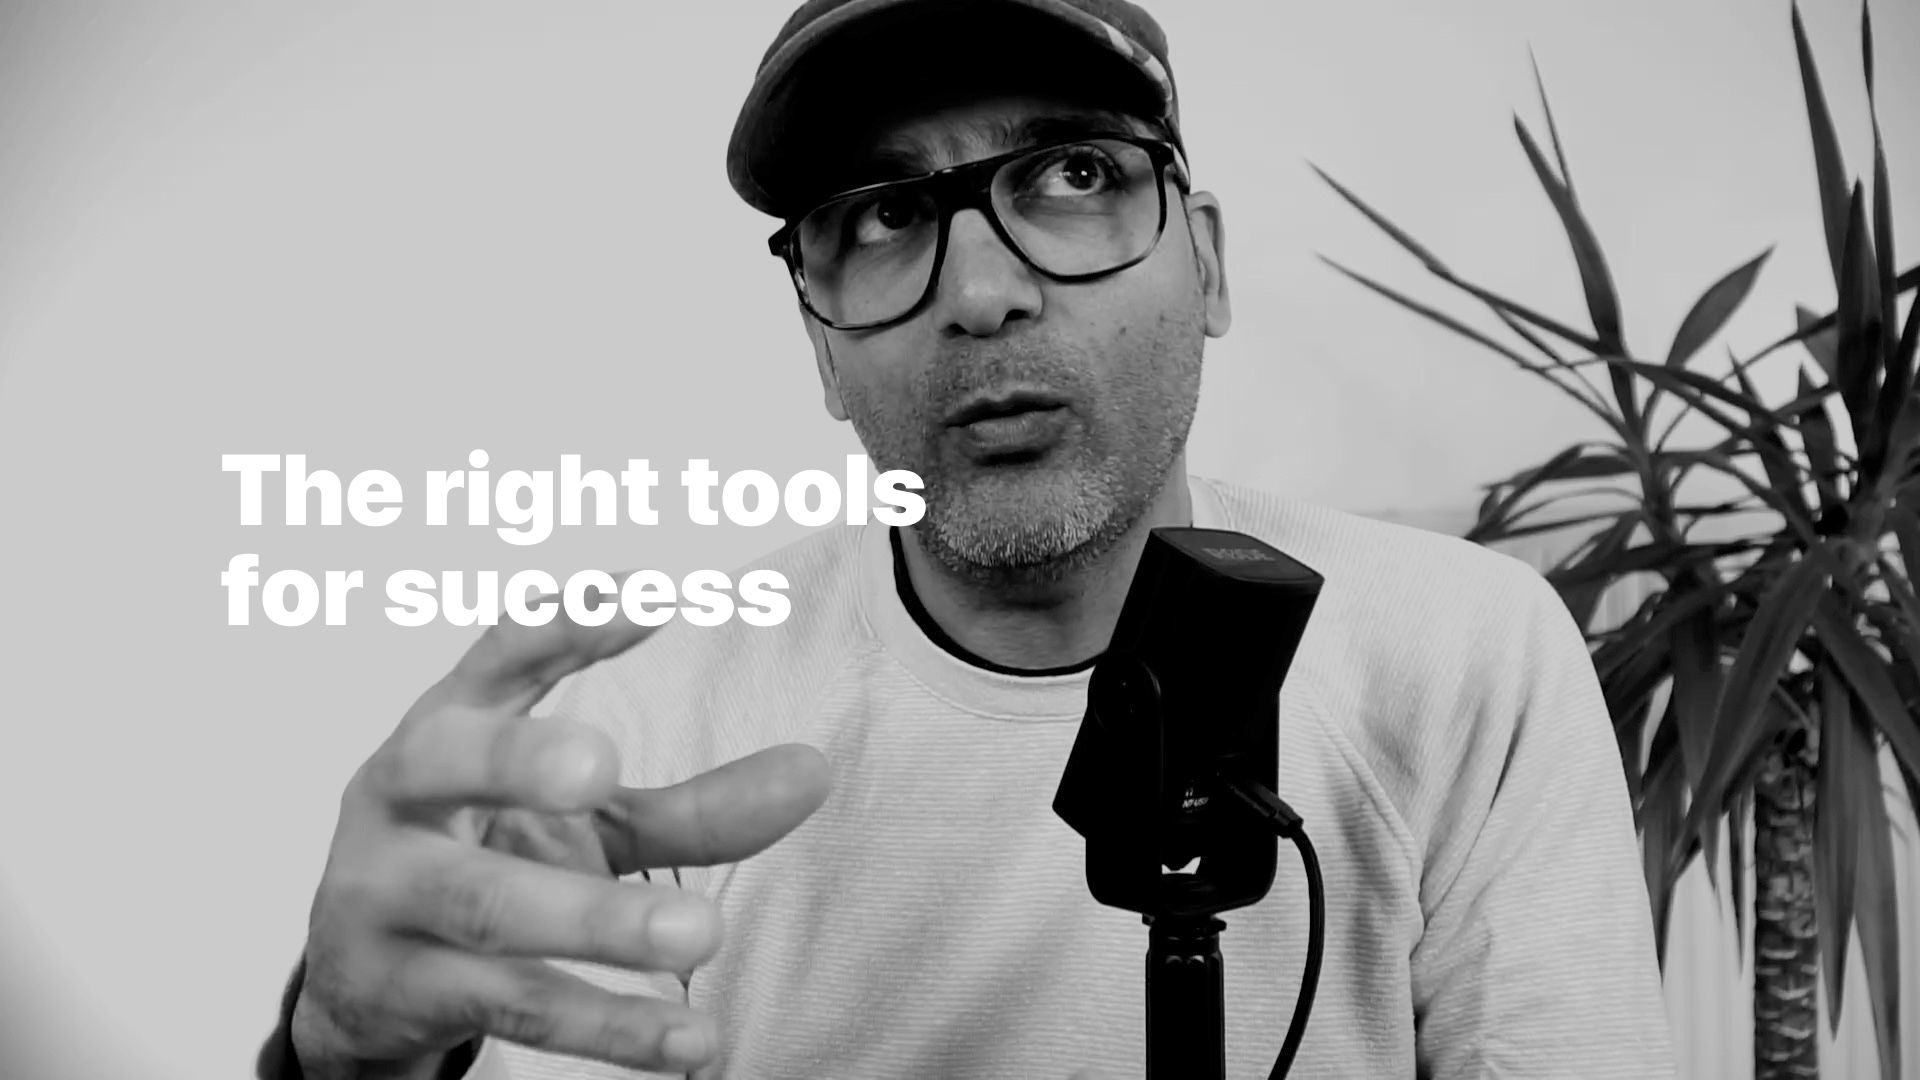 The right tools for success